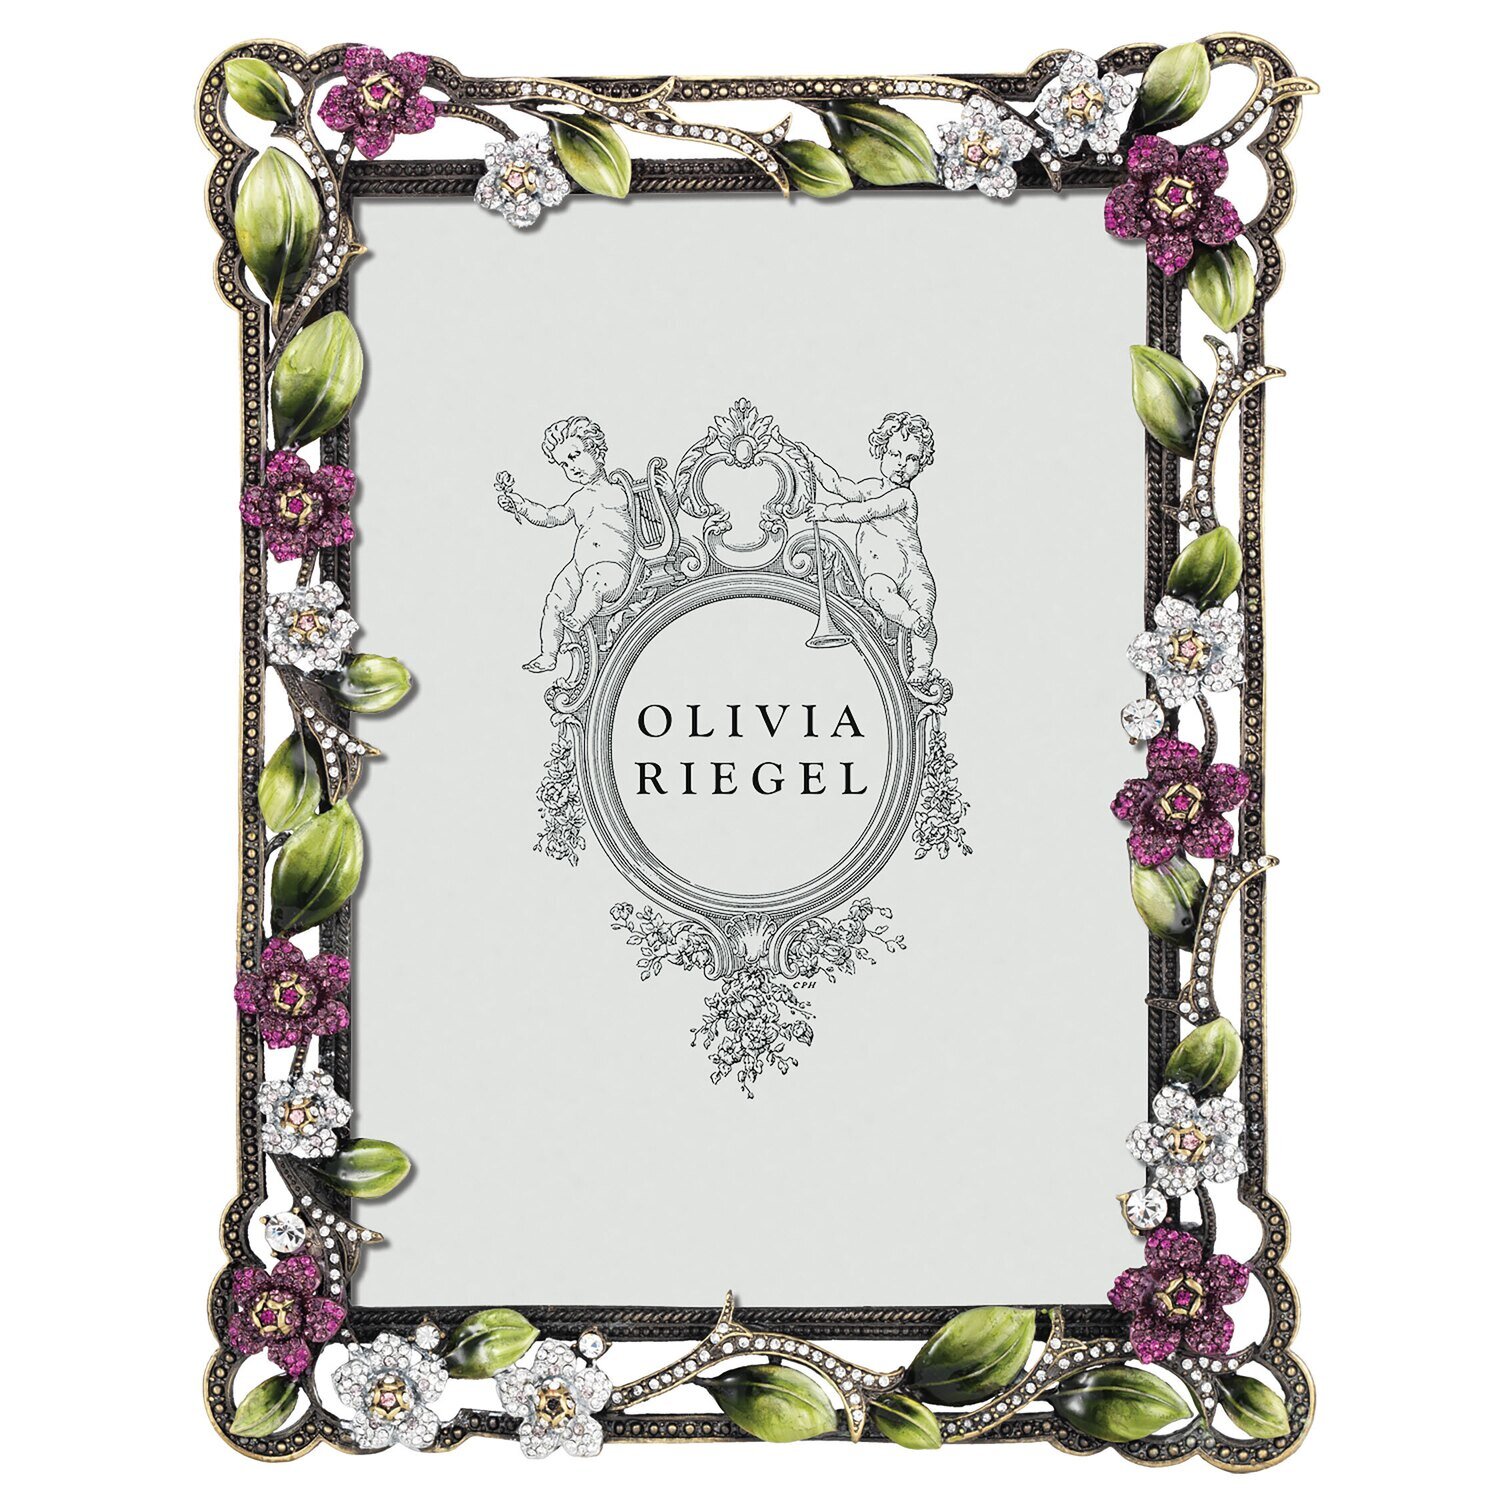 Olivia Riegel Sophie 5 x 7 Inch Picture Frame RT0142